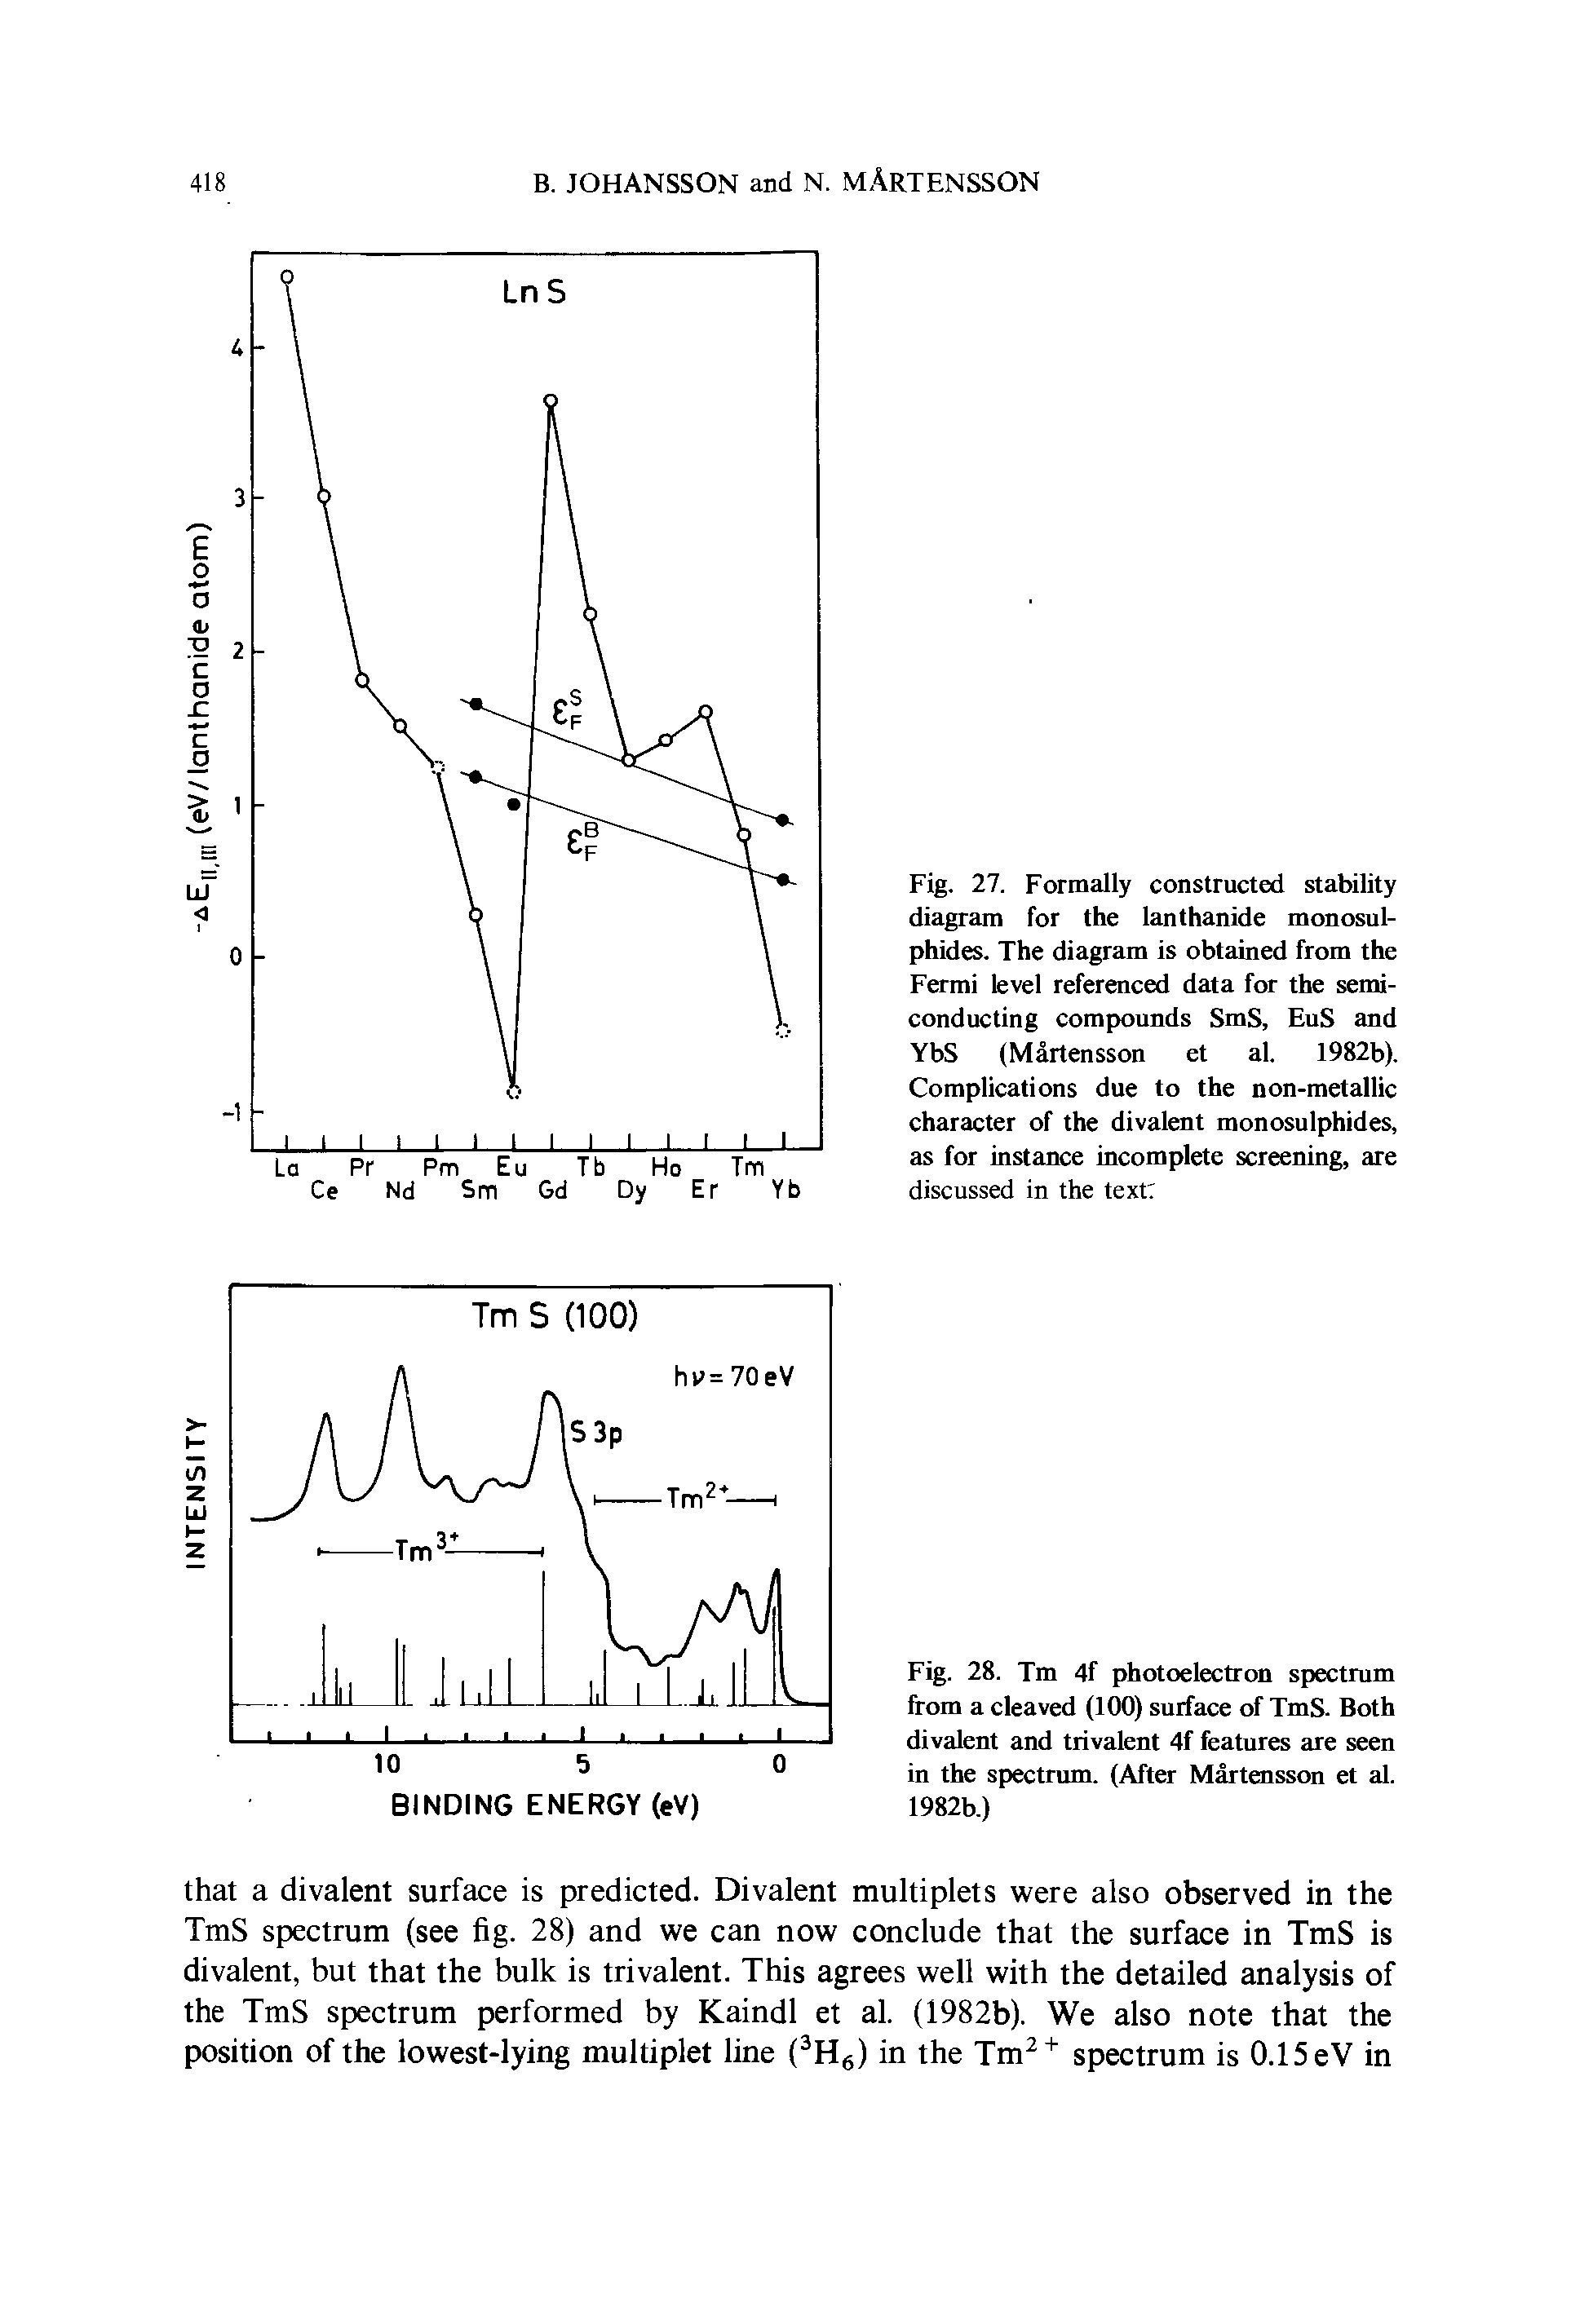 Fig. 27. Formally constructed stability diagram for the lanthanide monosulphides. The diagram is obtained from the Fermi level referenced data for the semiconducting compounds SmS, EuS and YbS (Mirtensson et al. 1982b). Complications due to the non-metallic character of the divalent monosulphides, as for instance incomplete screening, are discussed in the text ...